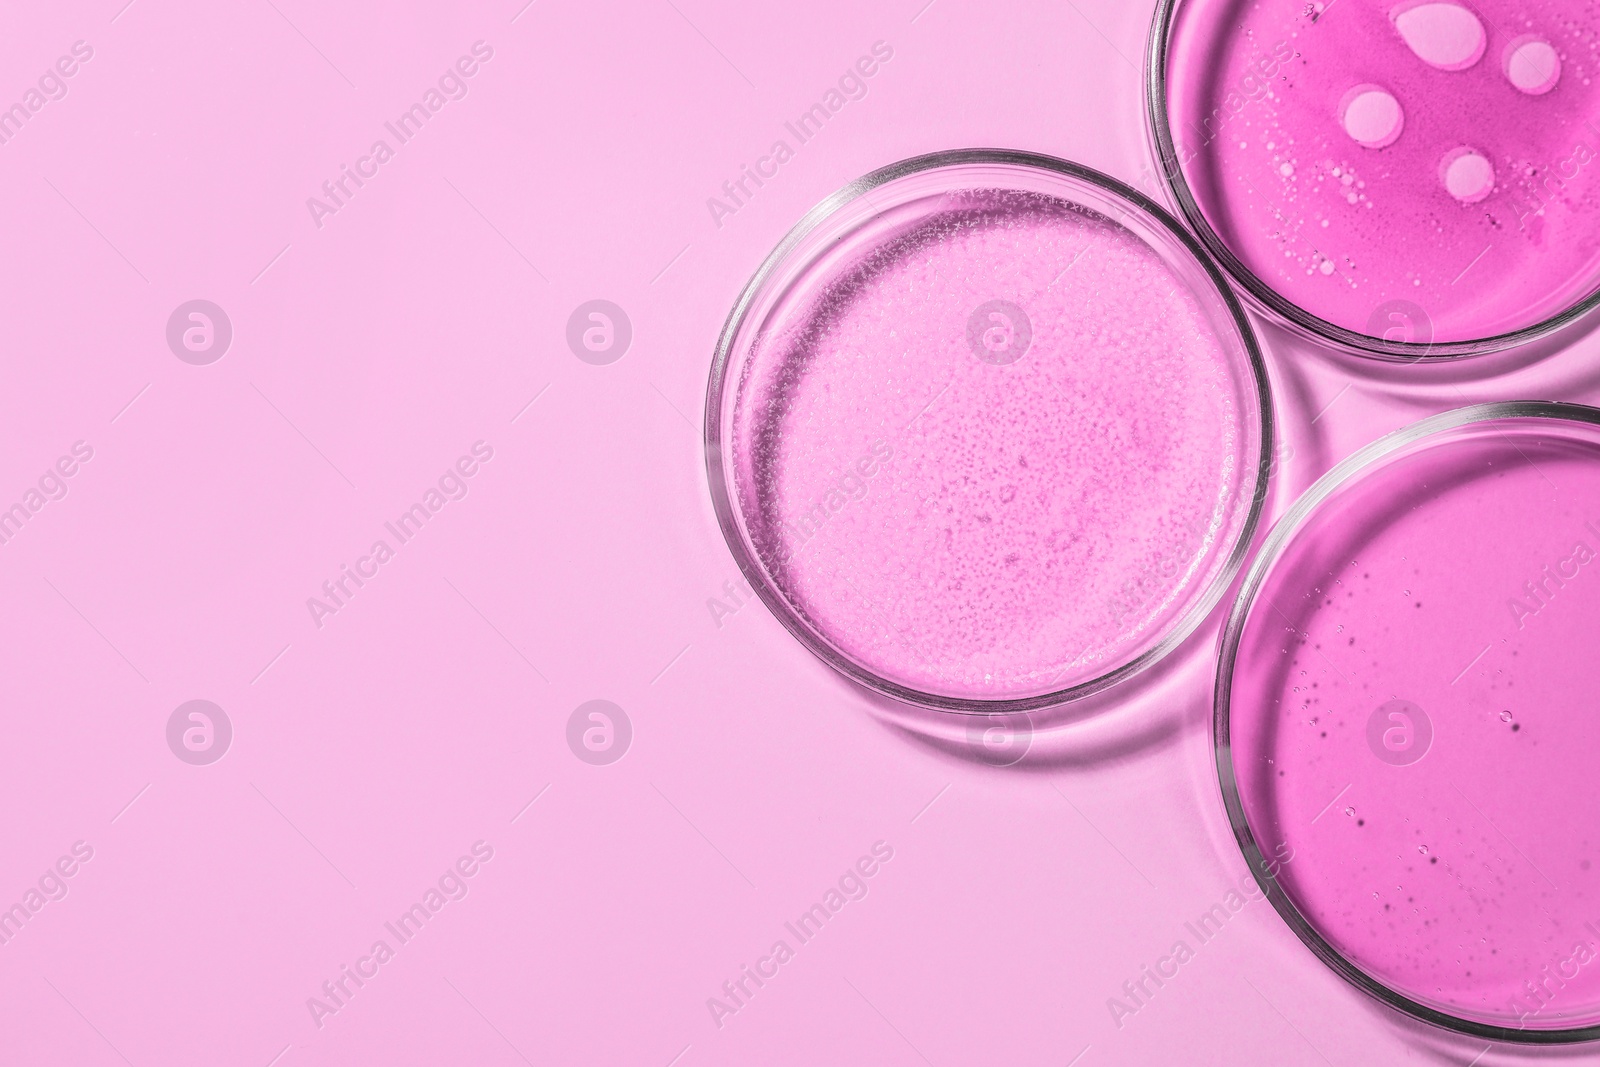 Image of Petri dishes with different samples on pink background, top view. Space for text. Laboratory glassware